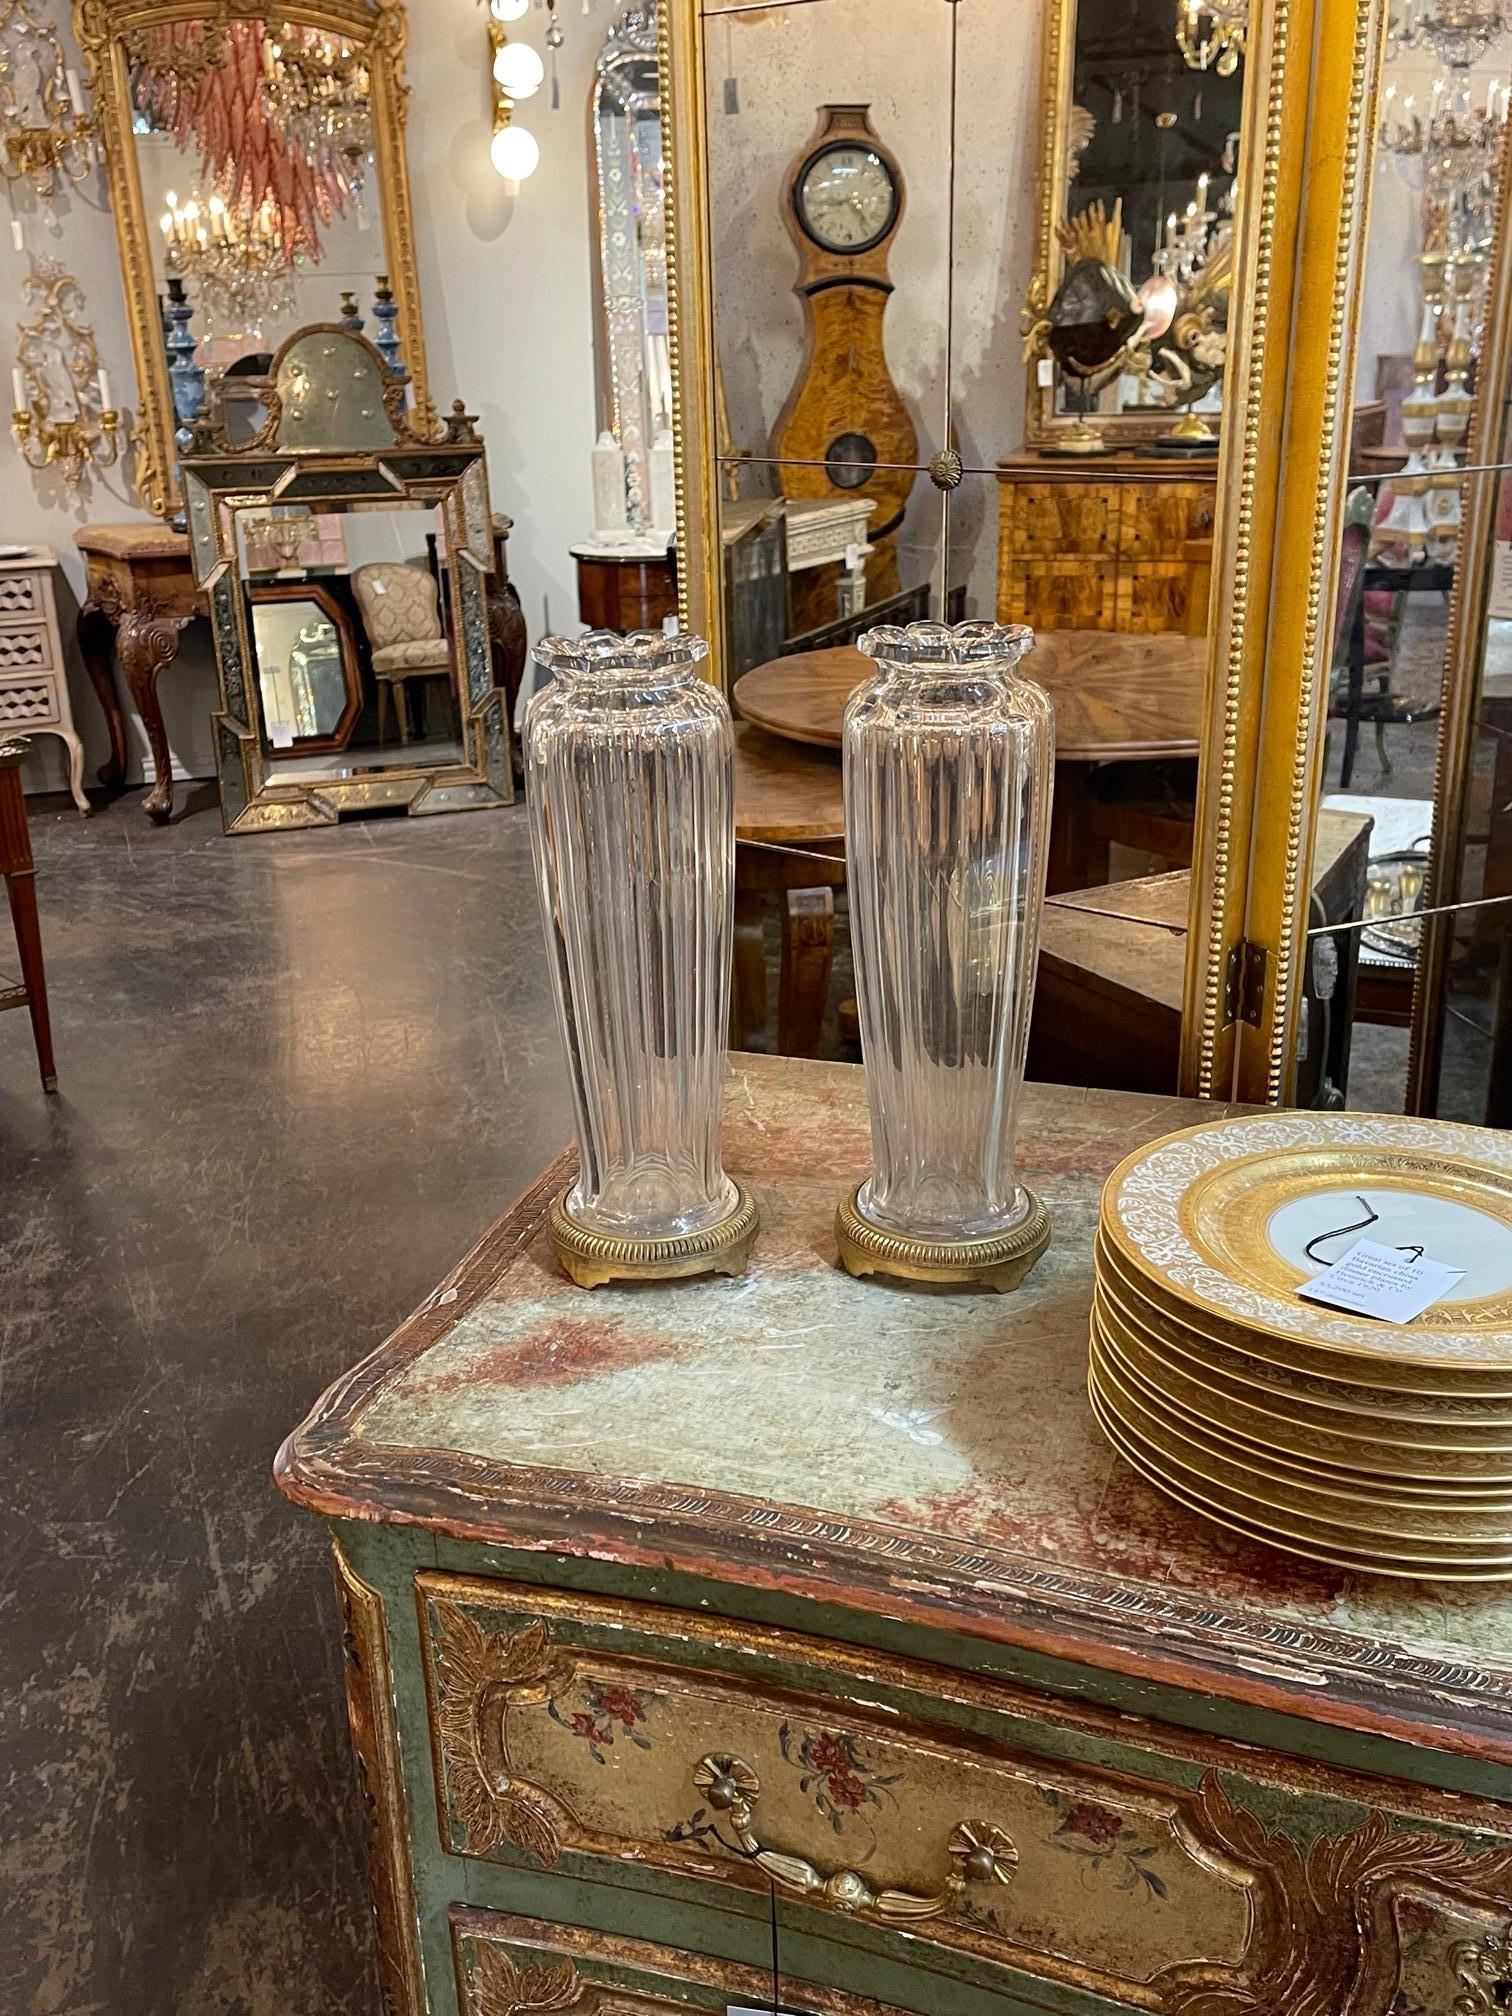 Pair of late 19th century French baccarat crystal vases on gilt bronze base, Circa 1890. These are beautiful classic design that will accent any home.